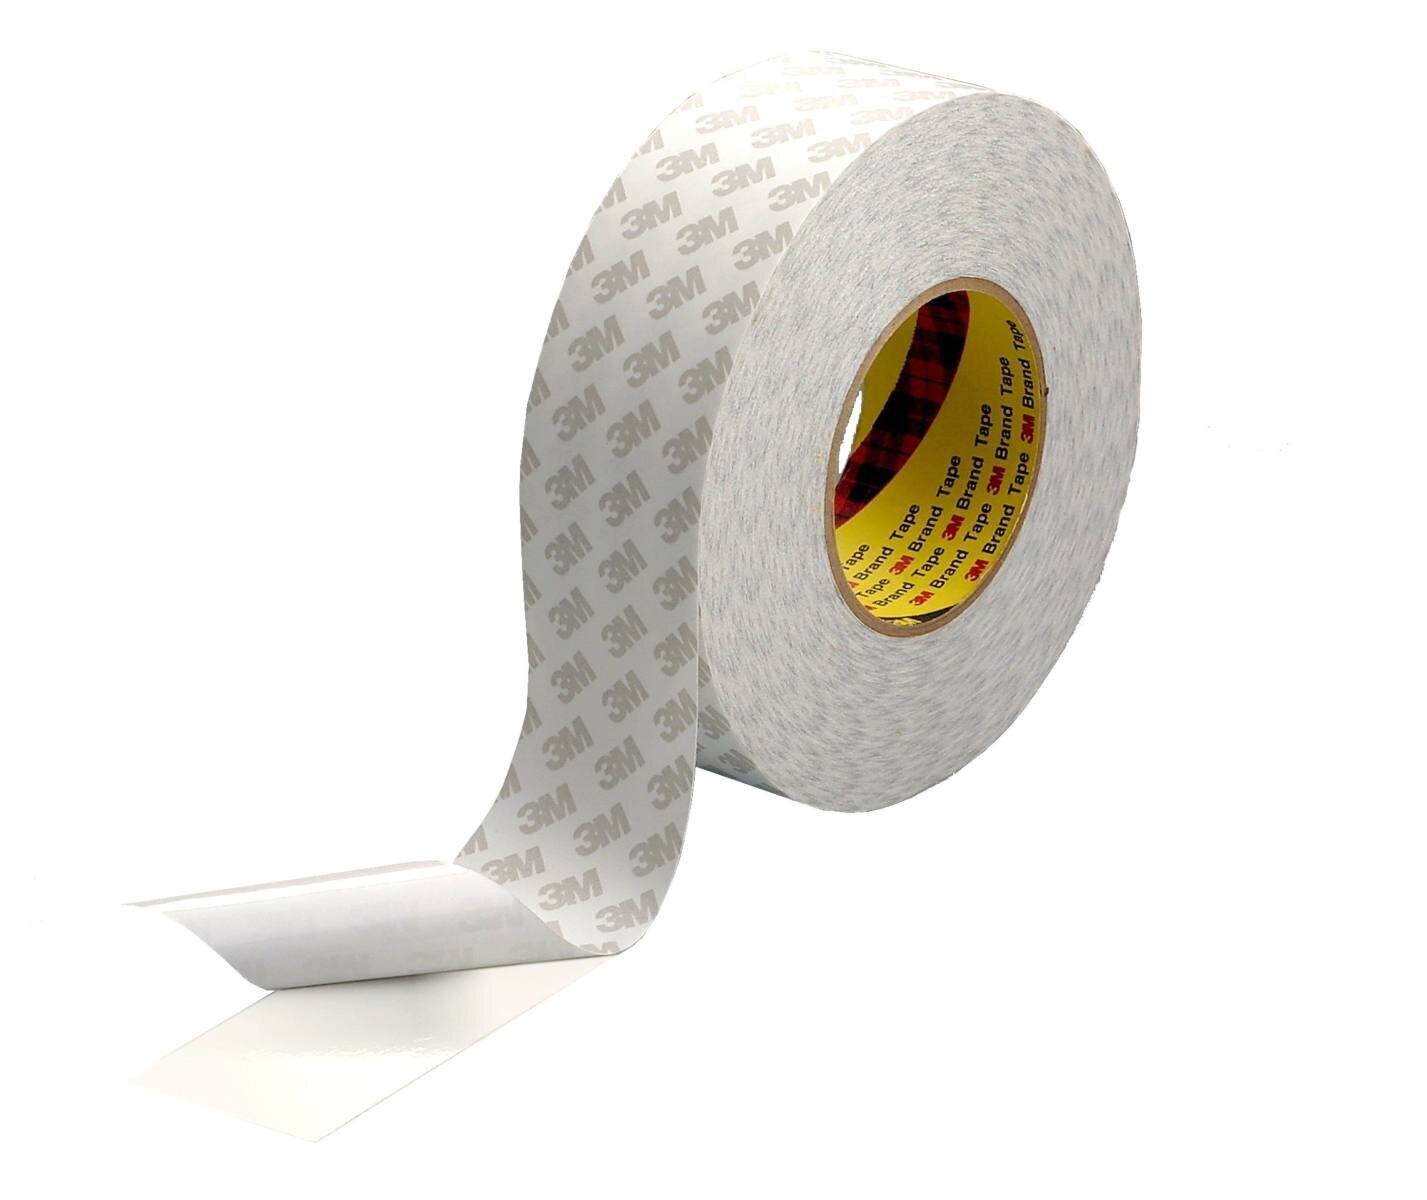 3M Double-sided adhesive tape with non-woven paper backing 9080HL, white, 25 mm x 50 m, 0.16 mm